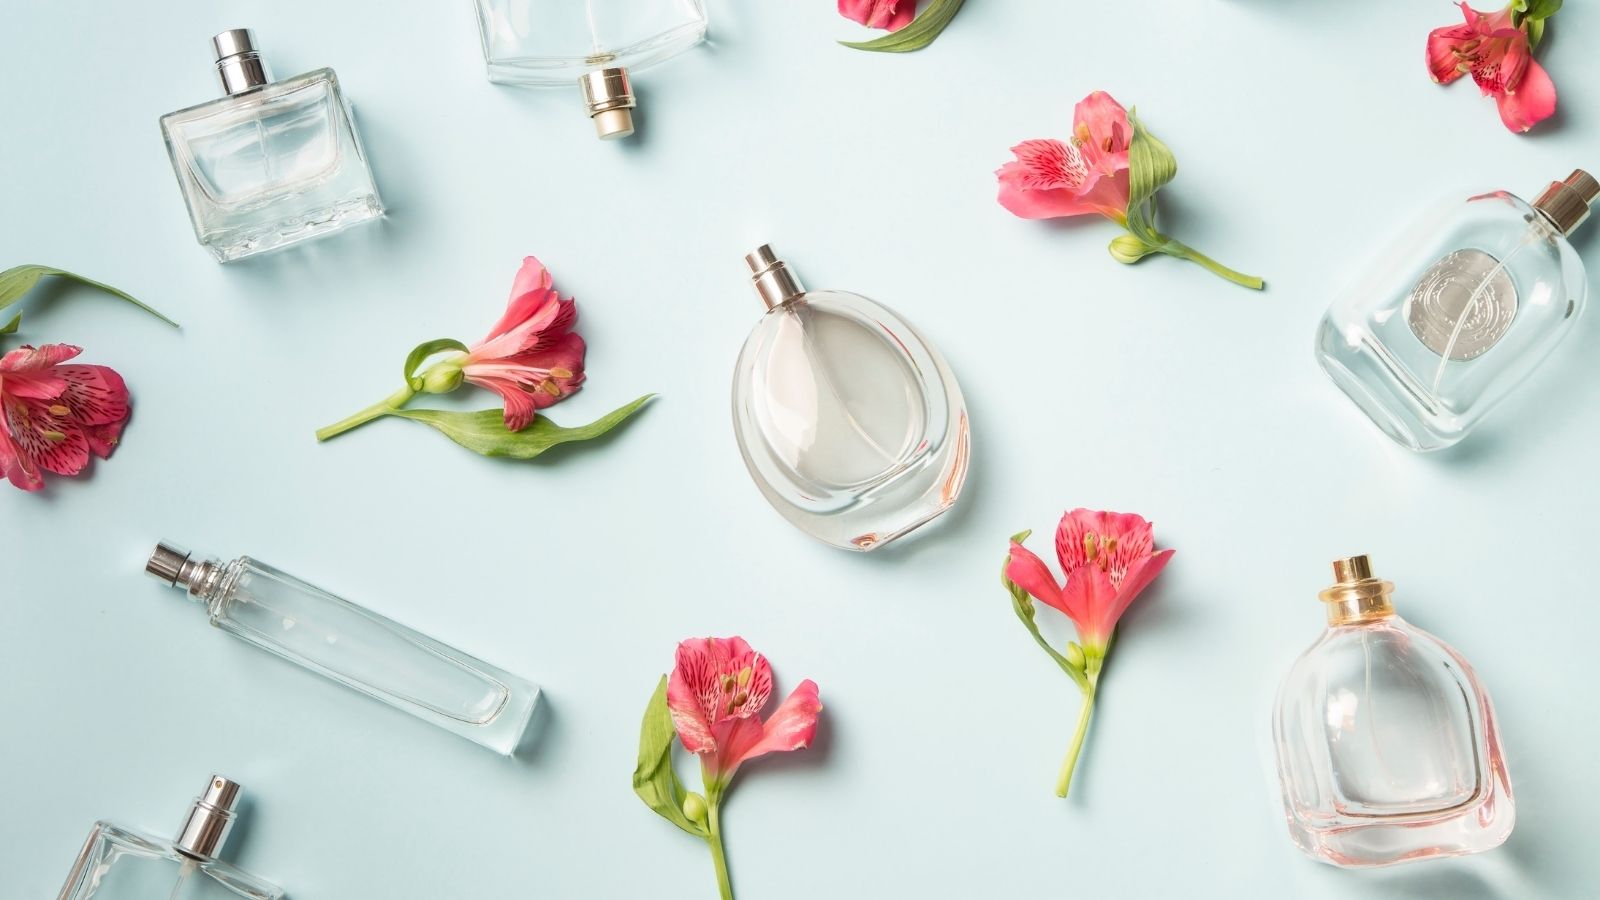 Does Perfume Expire? How to Know If Perfume Goes Bad